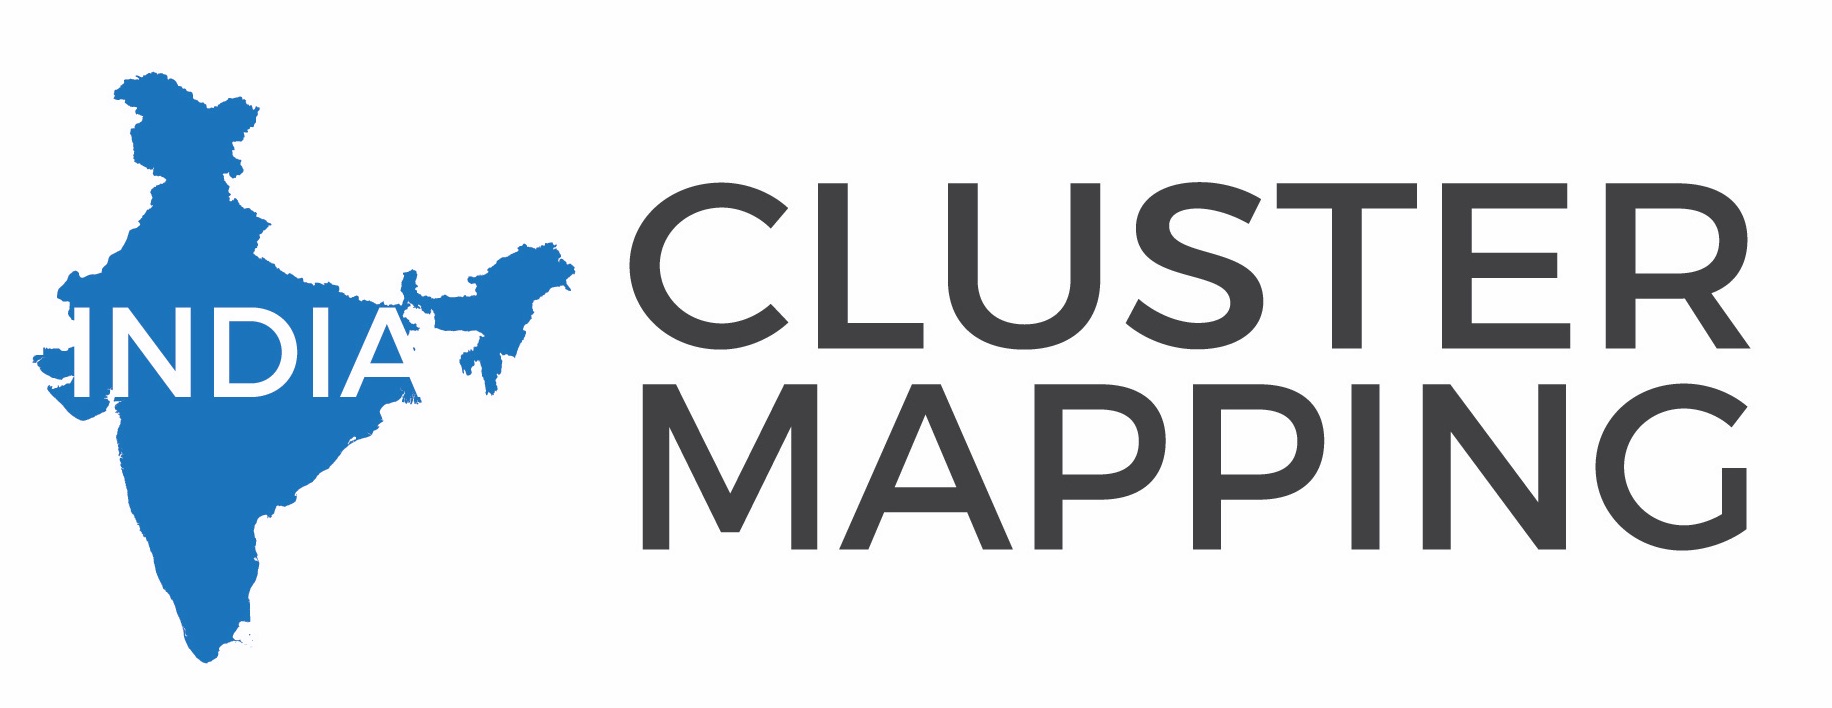 India Cluster Mapping